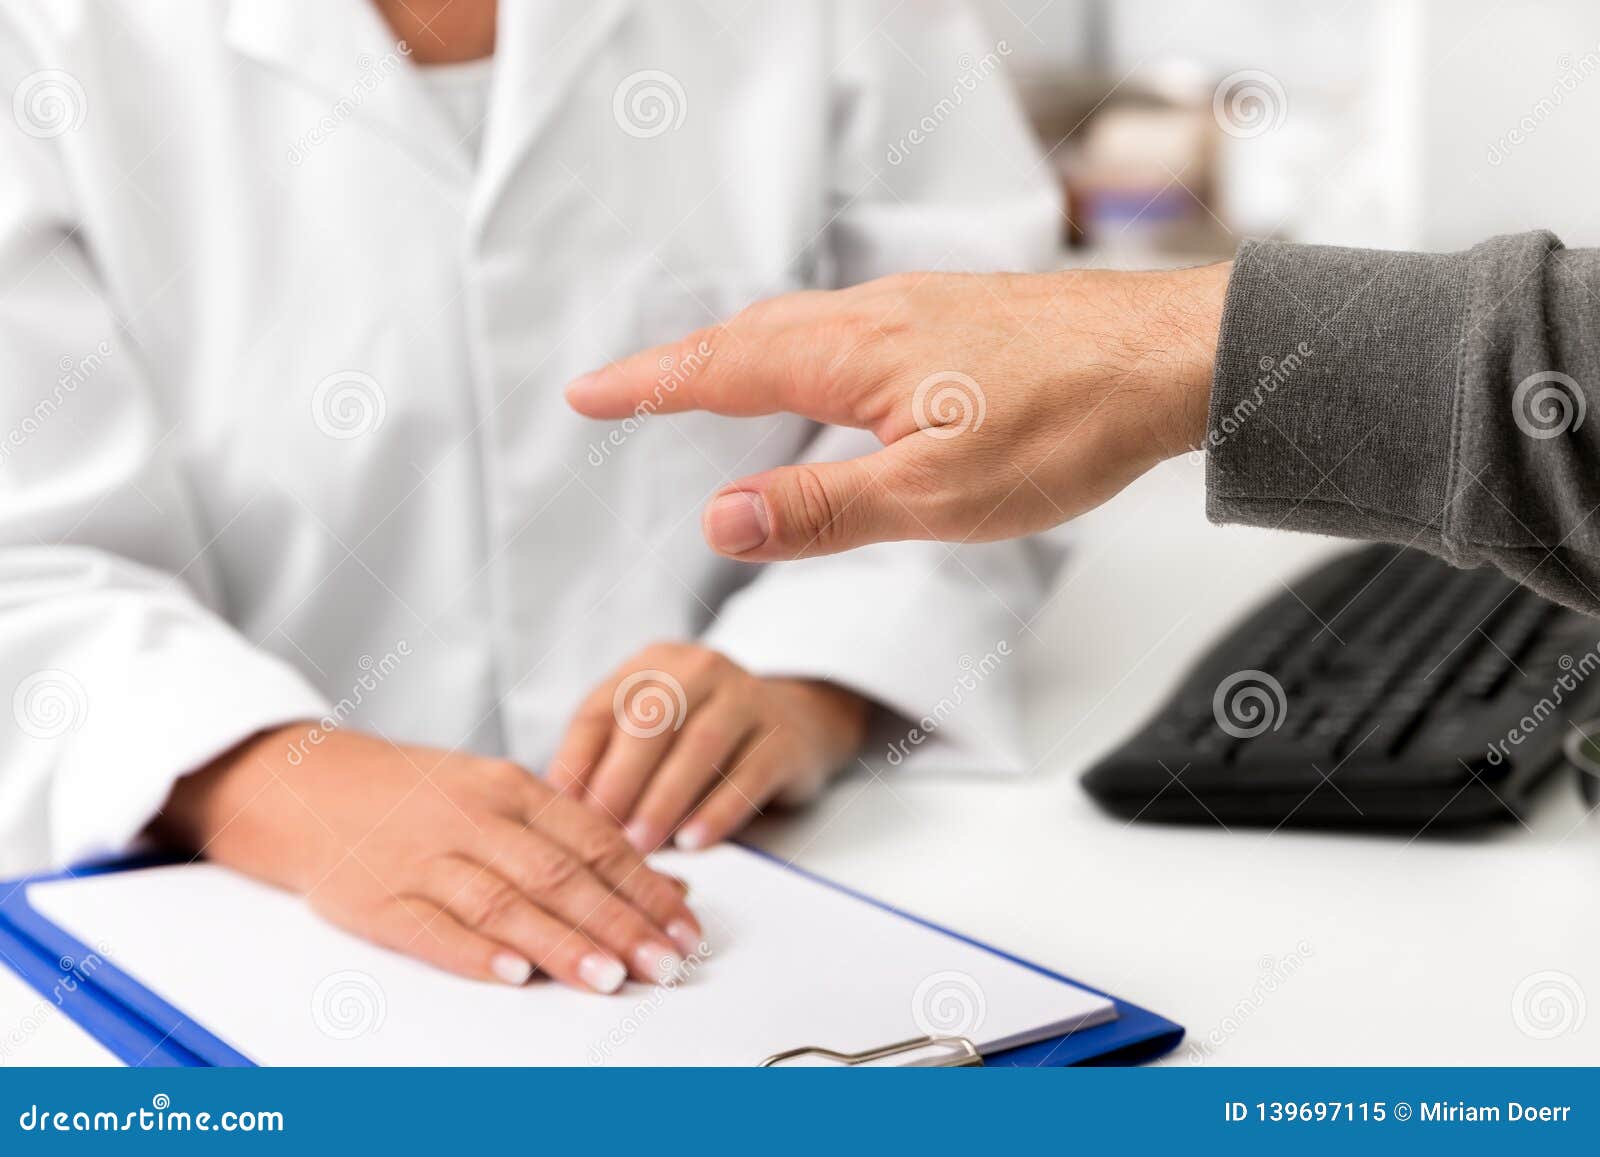 man showing his tremulous hand on the clinic, concept tremor, parkinson and stress